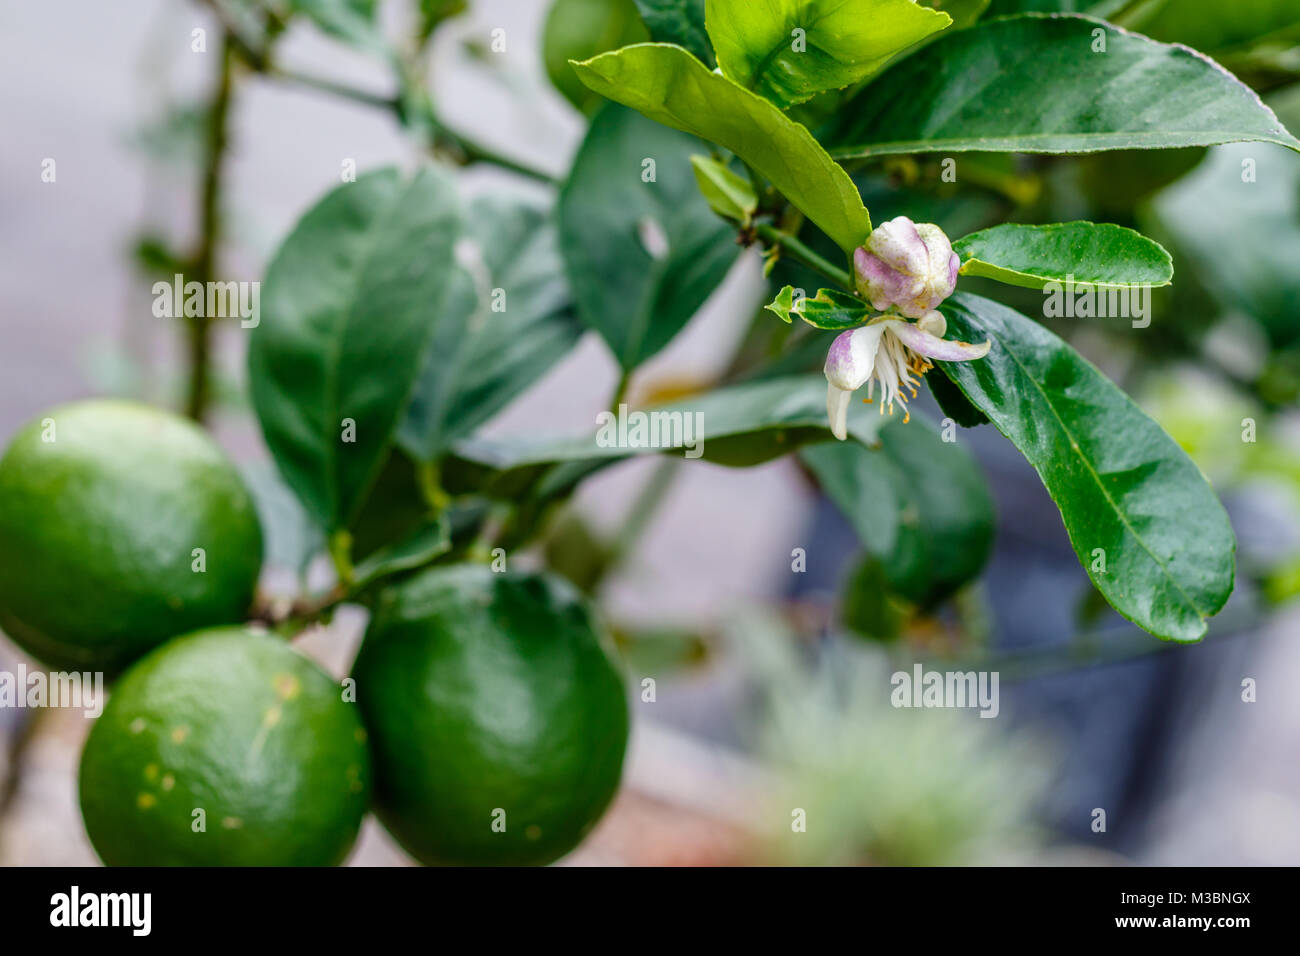 Three lemons on the branch, and a blooming lemon tree flower. Queensland, Australia Stock Photo